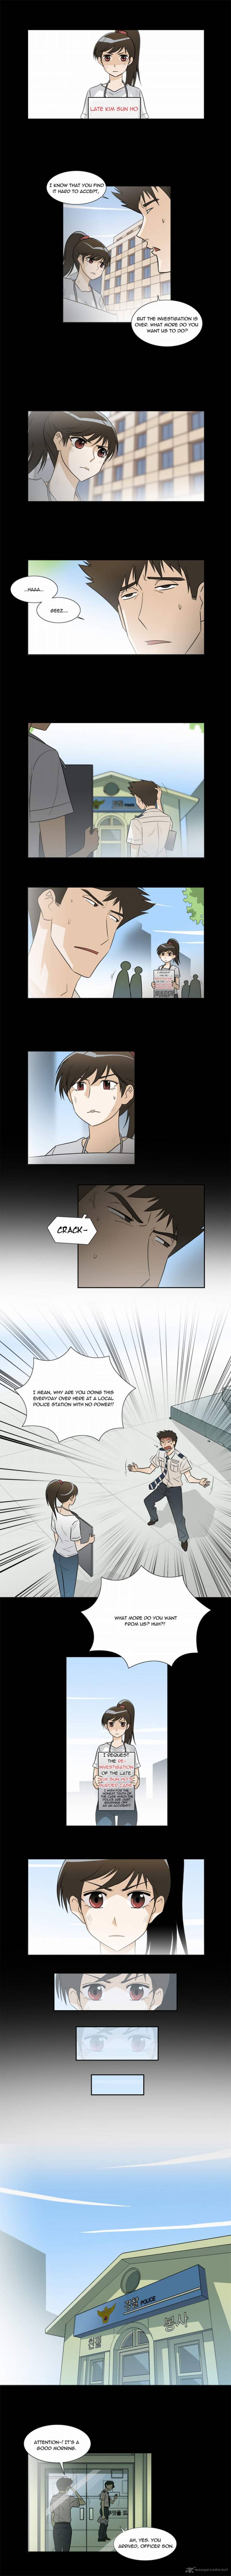 Melo Holic Chapter 25 Page 3